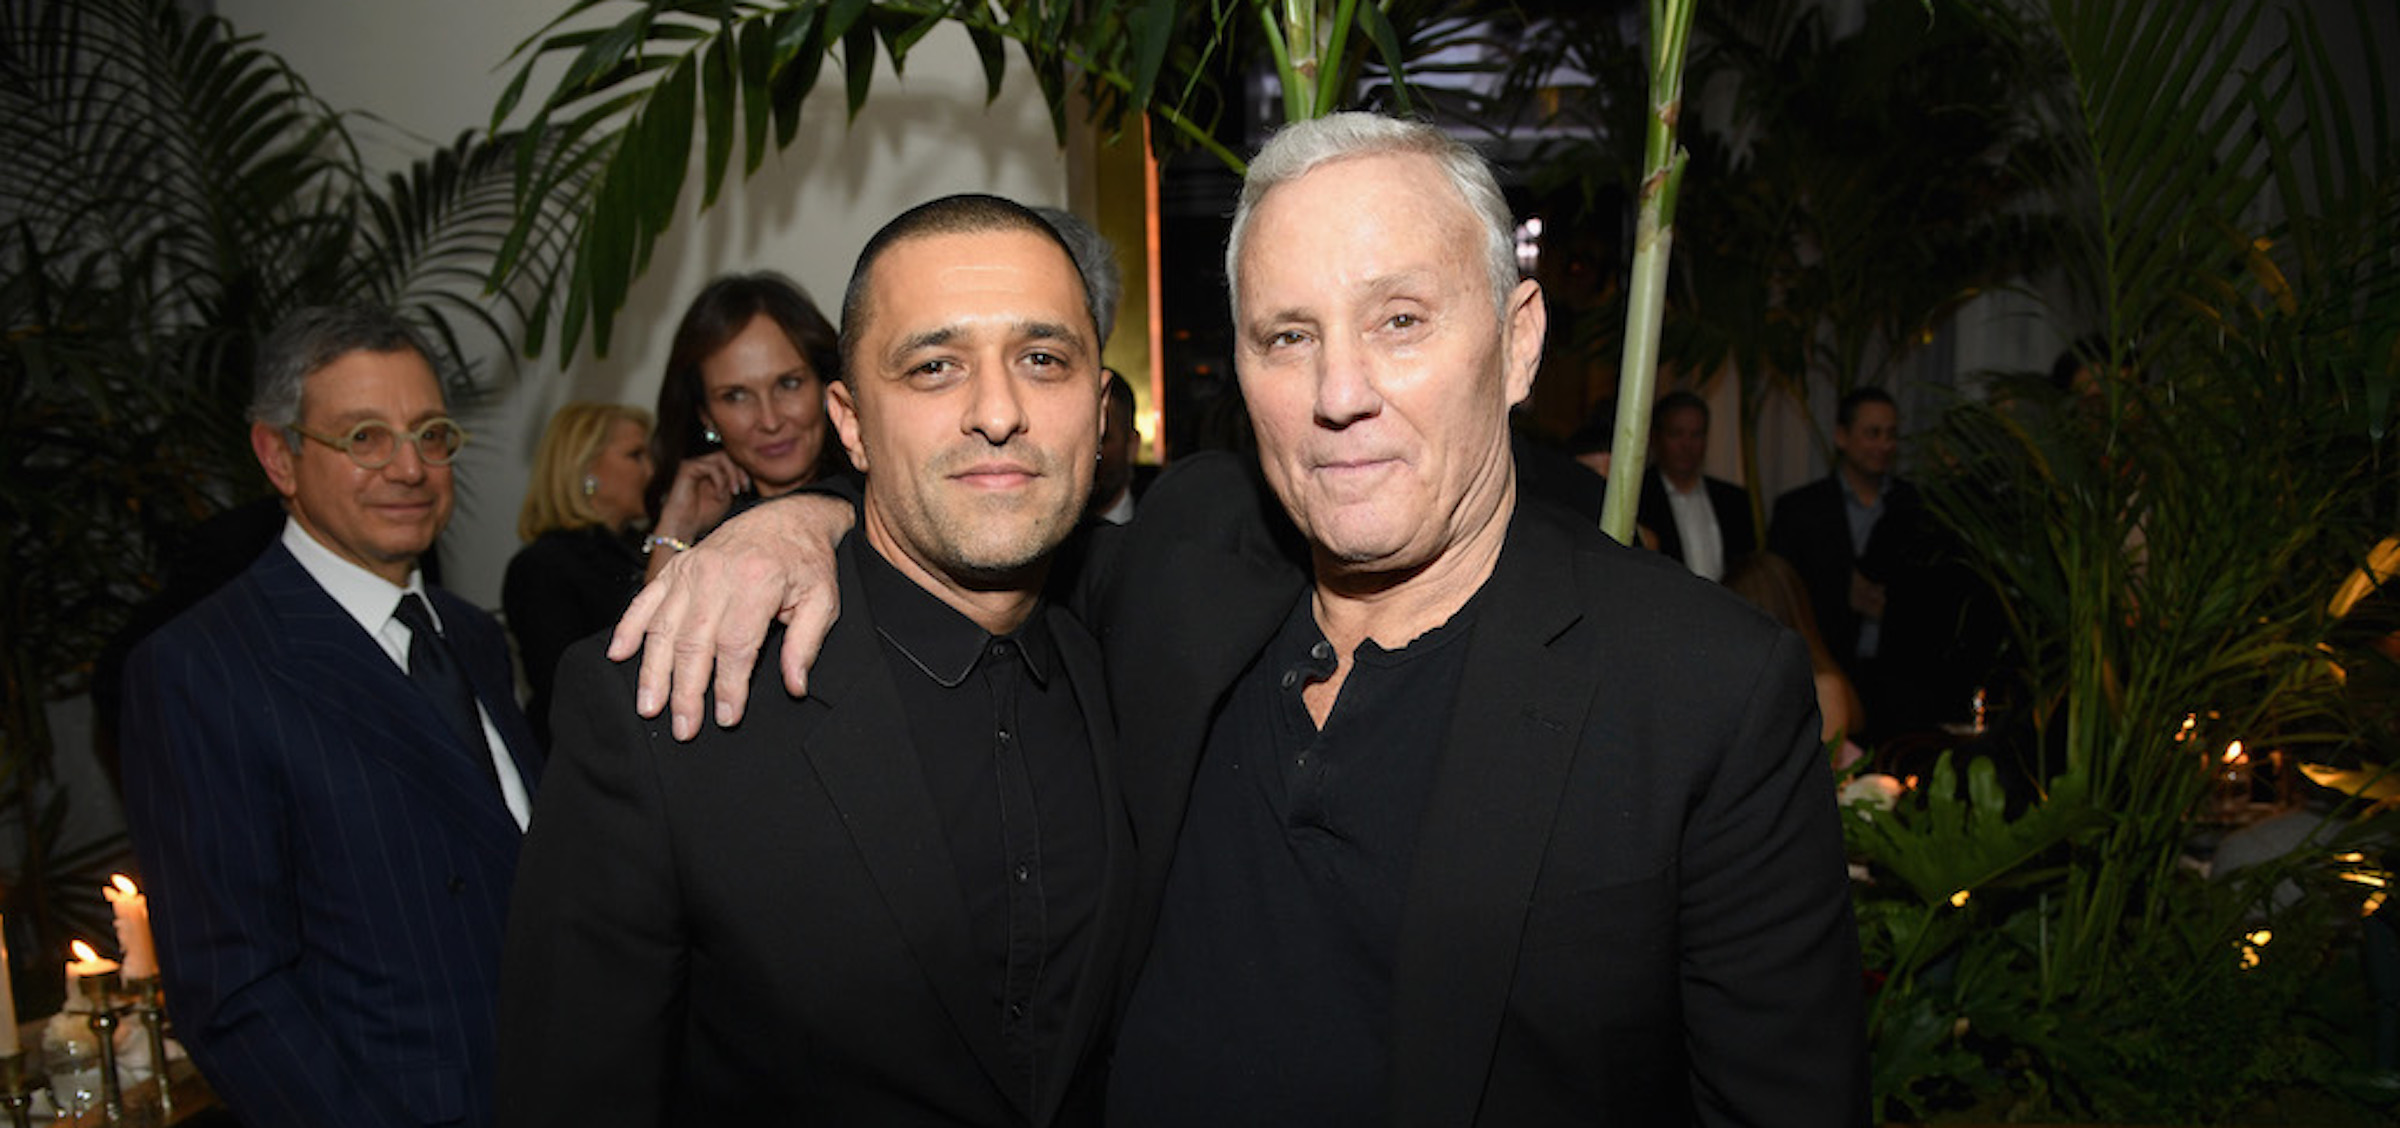 AHL In Conversation with Ian Schrager